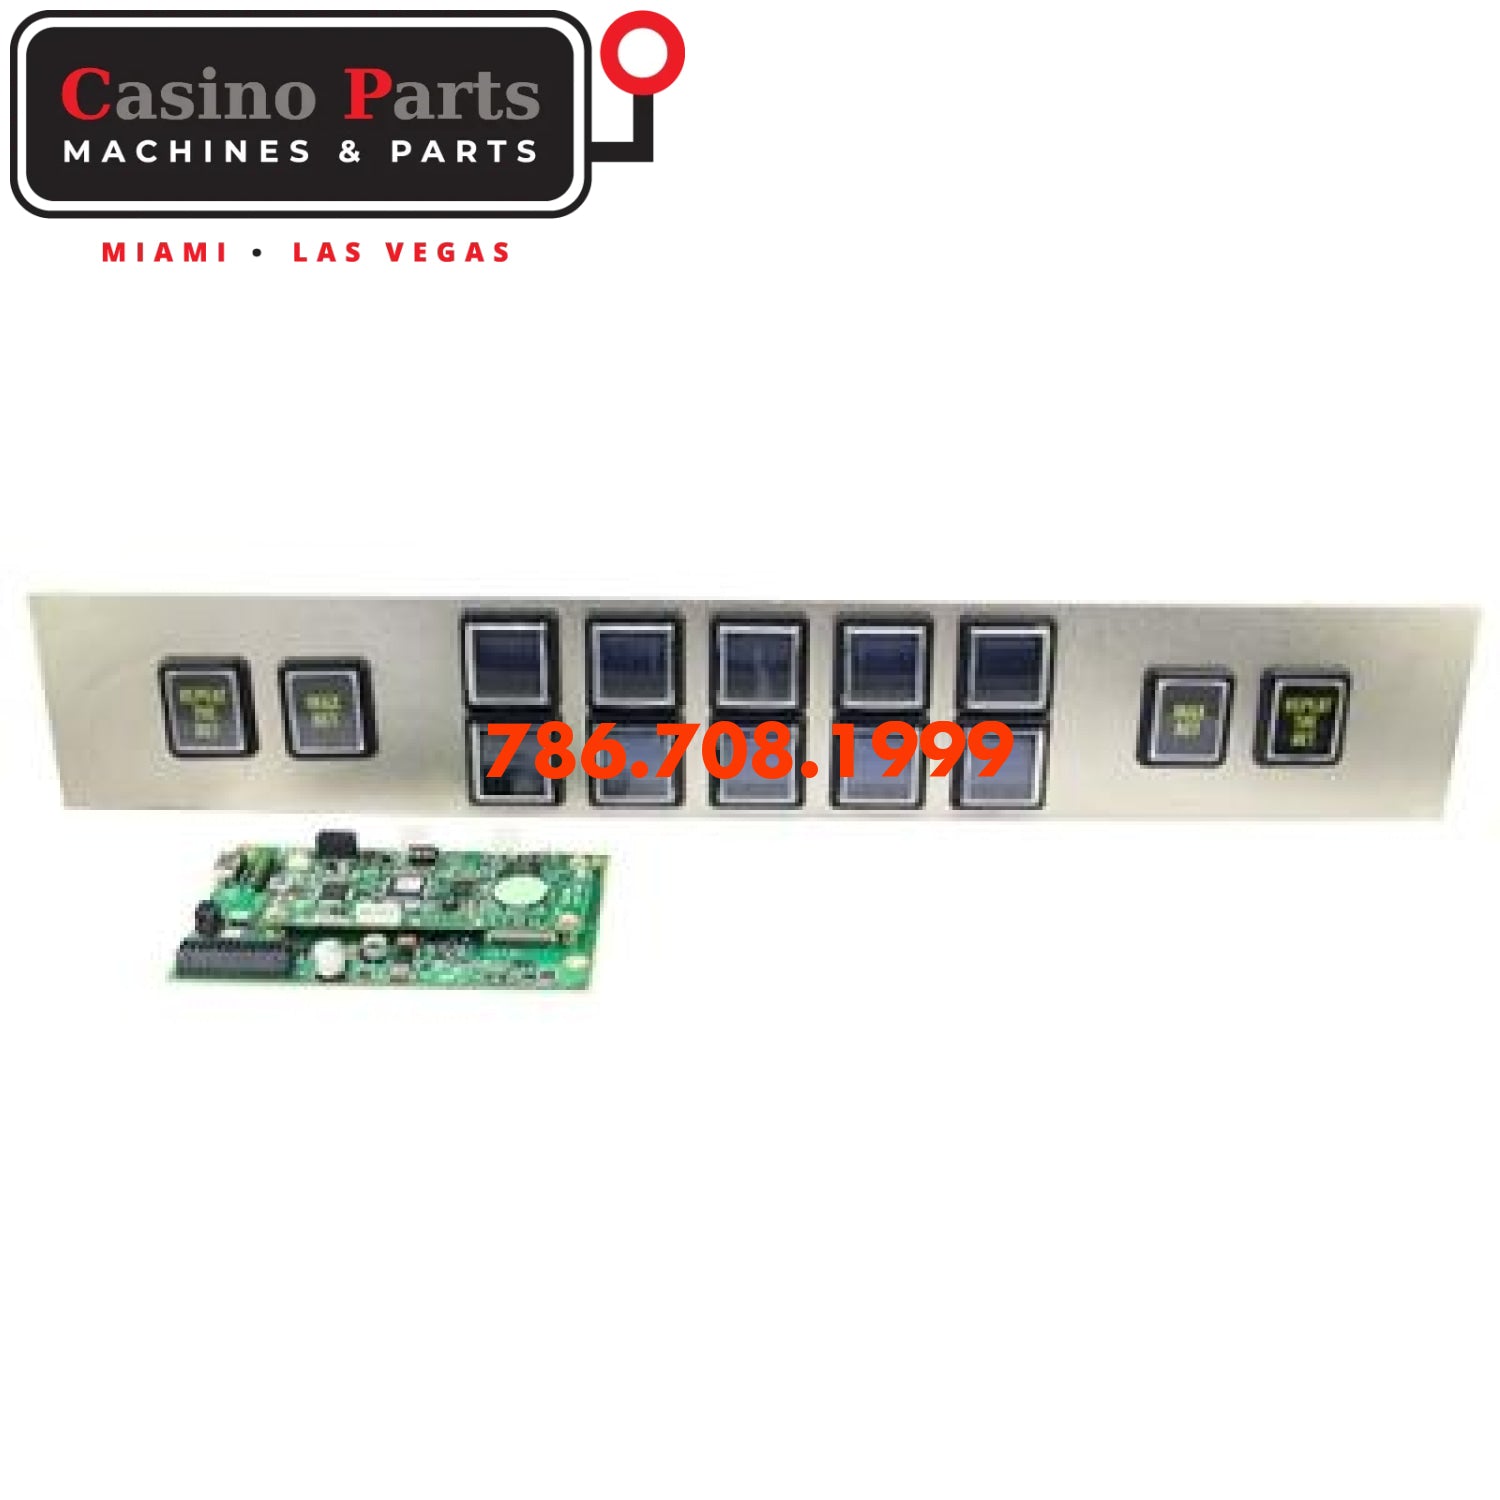 Dynamic Button Panel For Igt G22/g23 With Controller